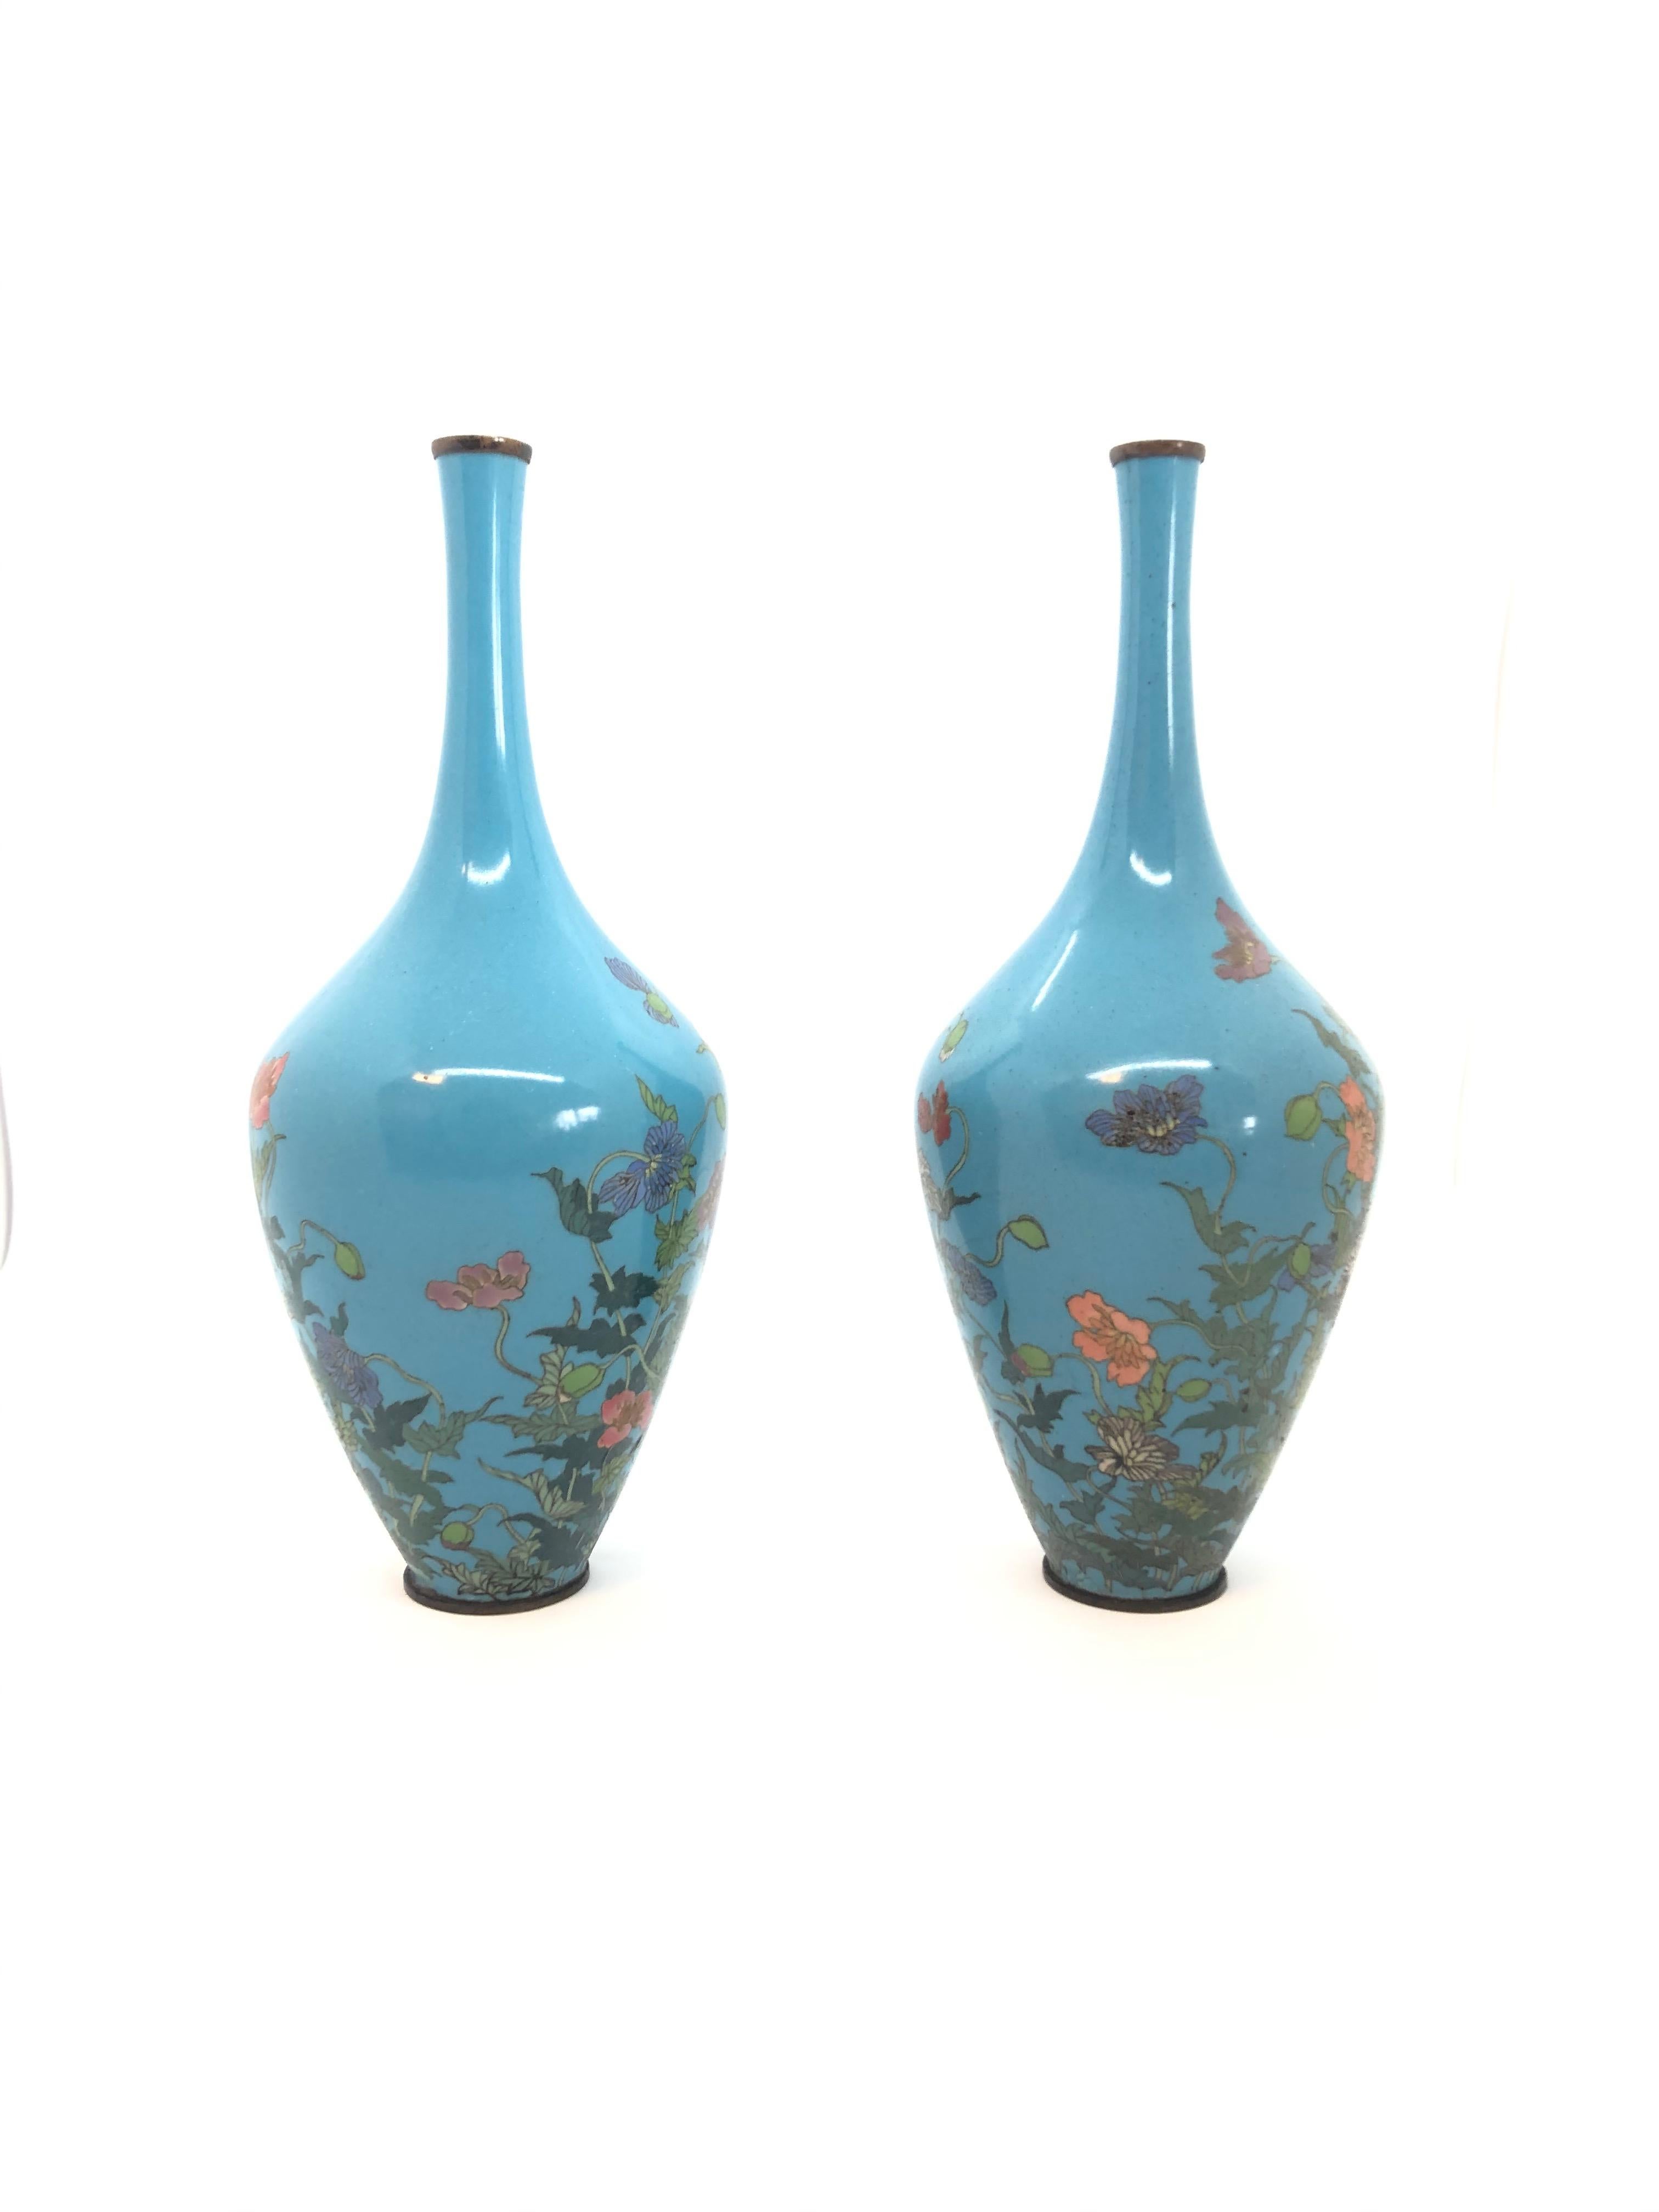 Pair of Japanese Cloisonné Vases, 19th Century In Good Condition For Sale In Stockholm, SE